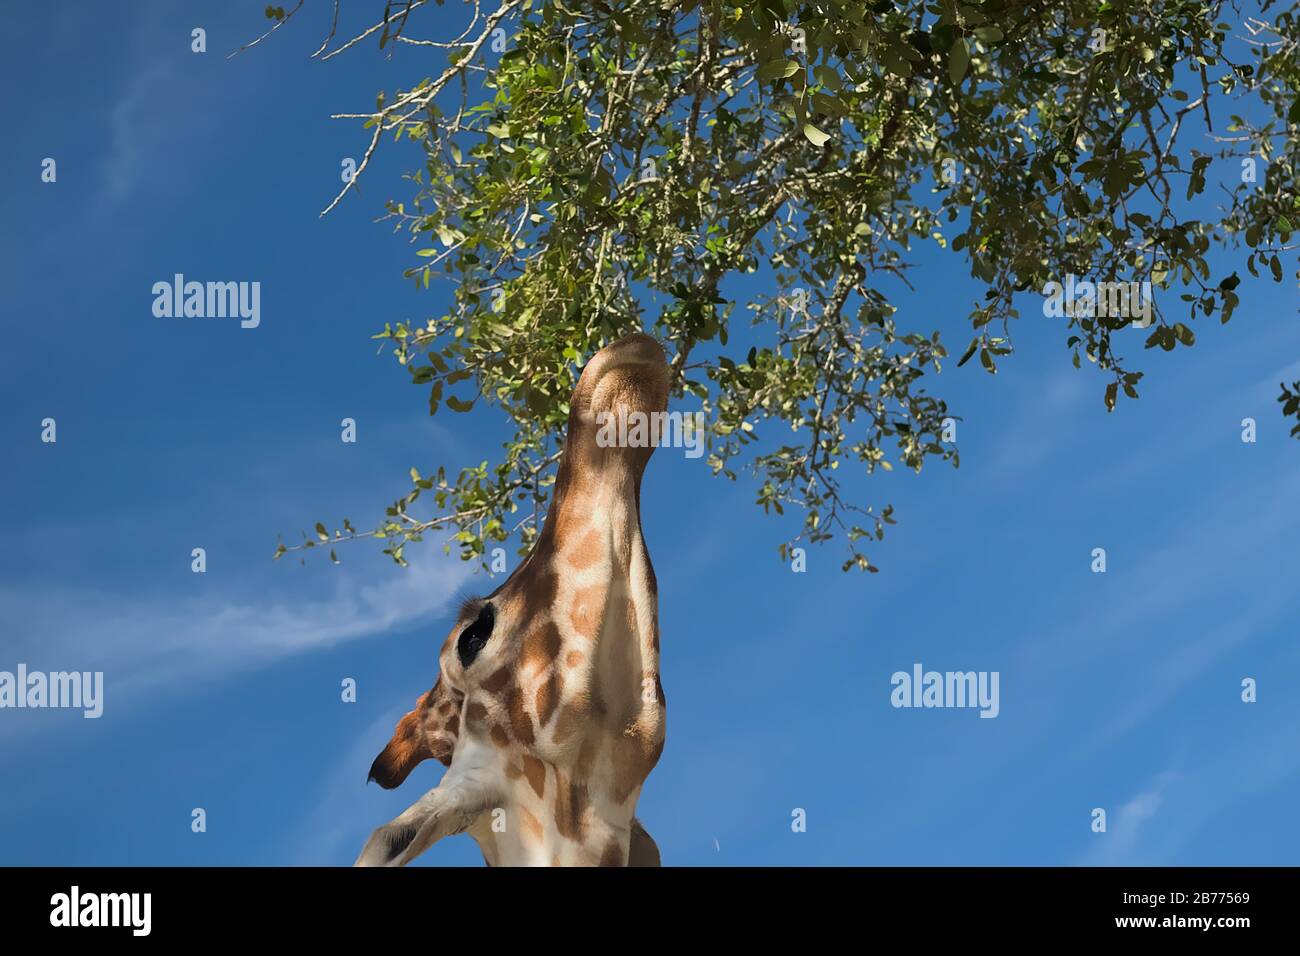 African giraffe reaching up with it's long neck to eat the leaves of a tall green tree with bright blue sky in background. Stock Photo